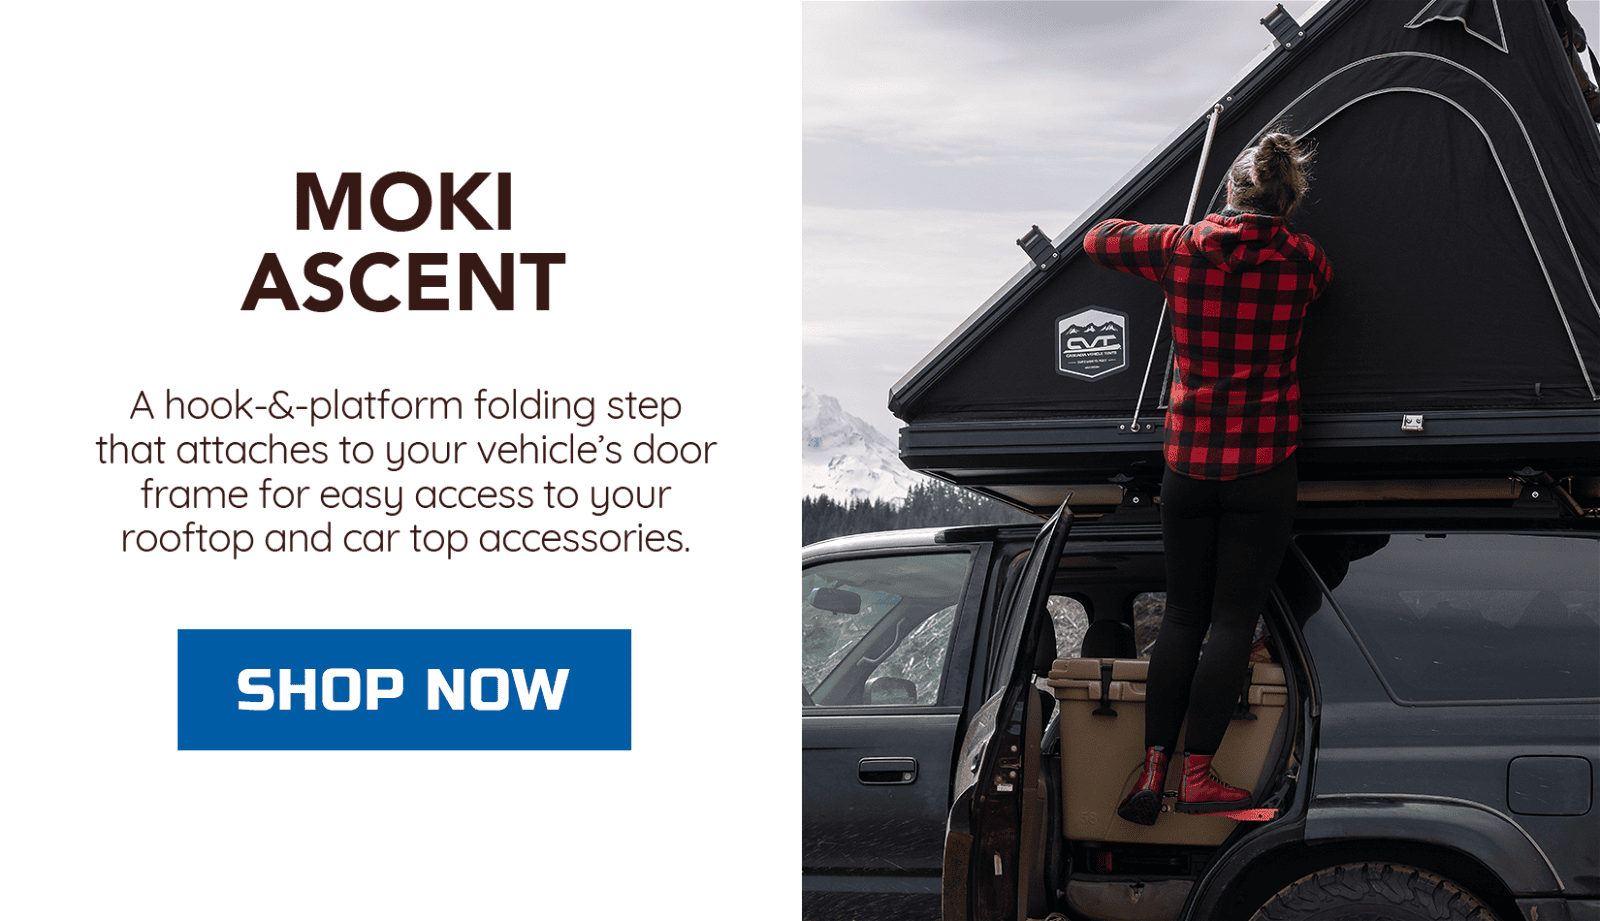 MOKI ASCENT: A hook-&-platform folding step that attaches to your vehicle’s door frame for easy access to your rooftop and car top accessories.